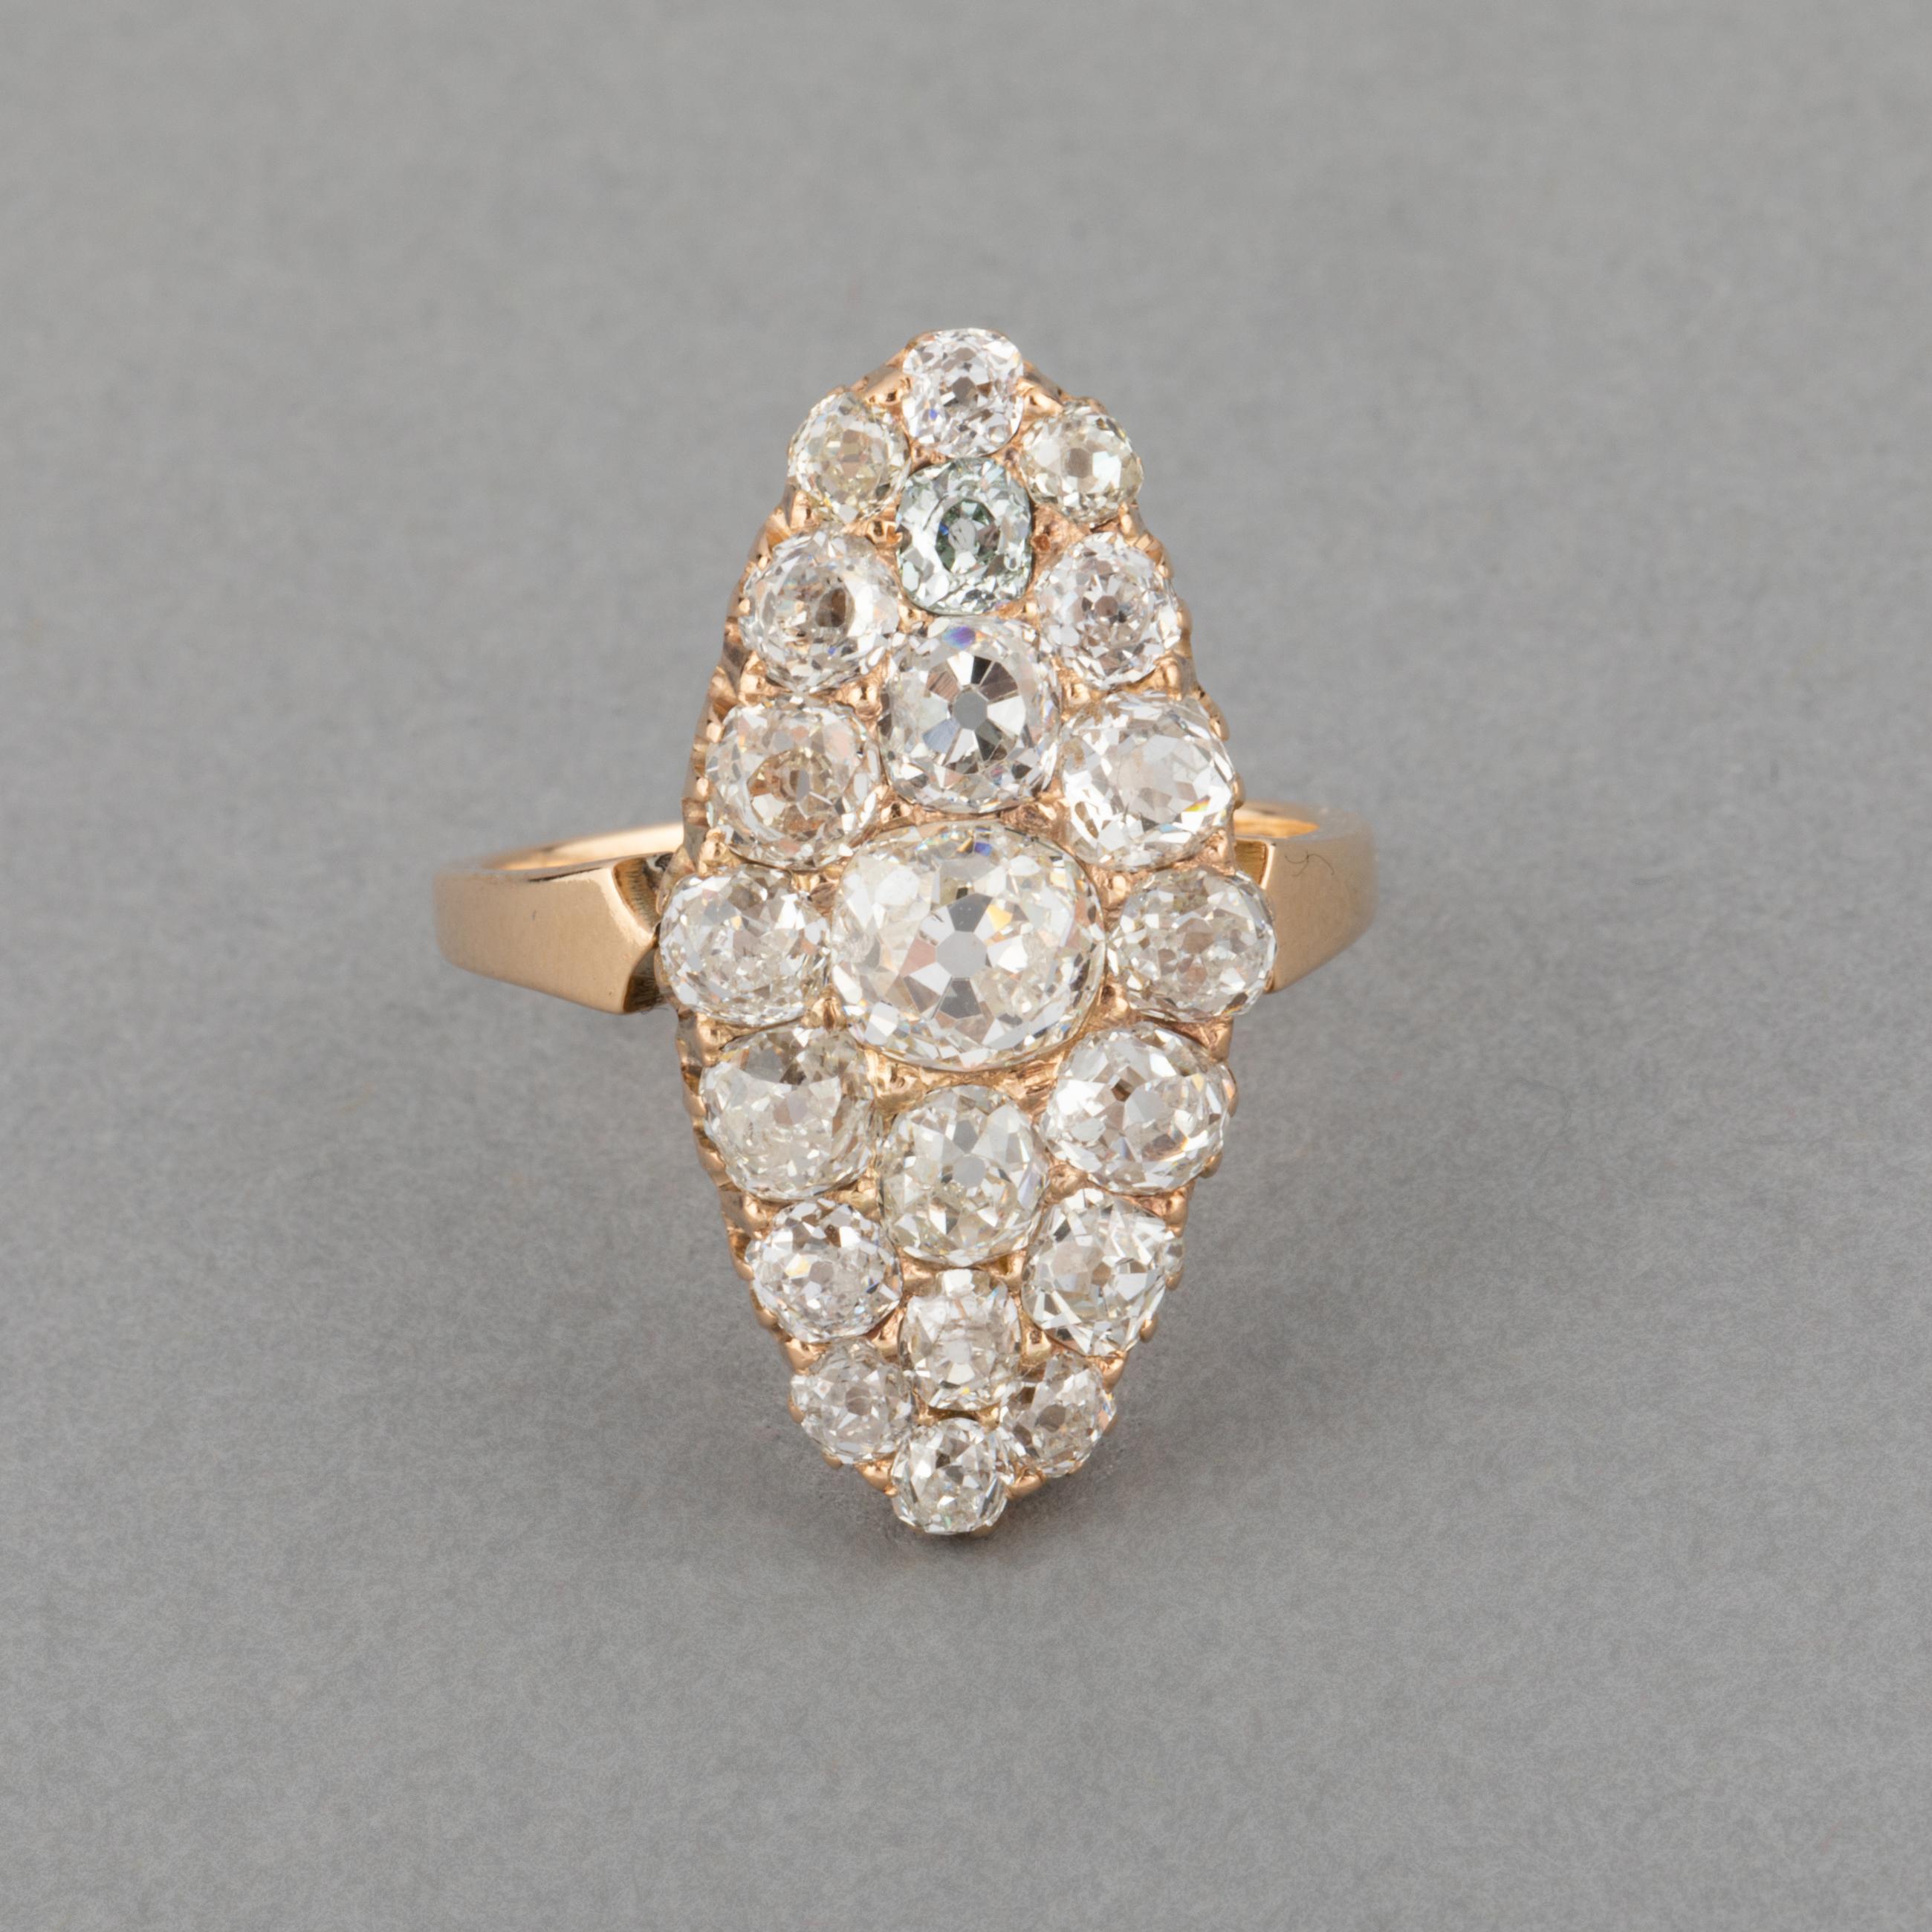 A very beautiful antique ring, made in gold 18k and set with 3 carats of very good quality diamonds. 

The bigger diamond weights 0.60 carats approximately. The diamonds and white color and have good clarity. 

Dimensions:24*13mm for the diamond